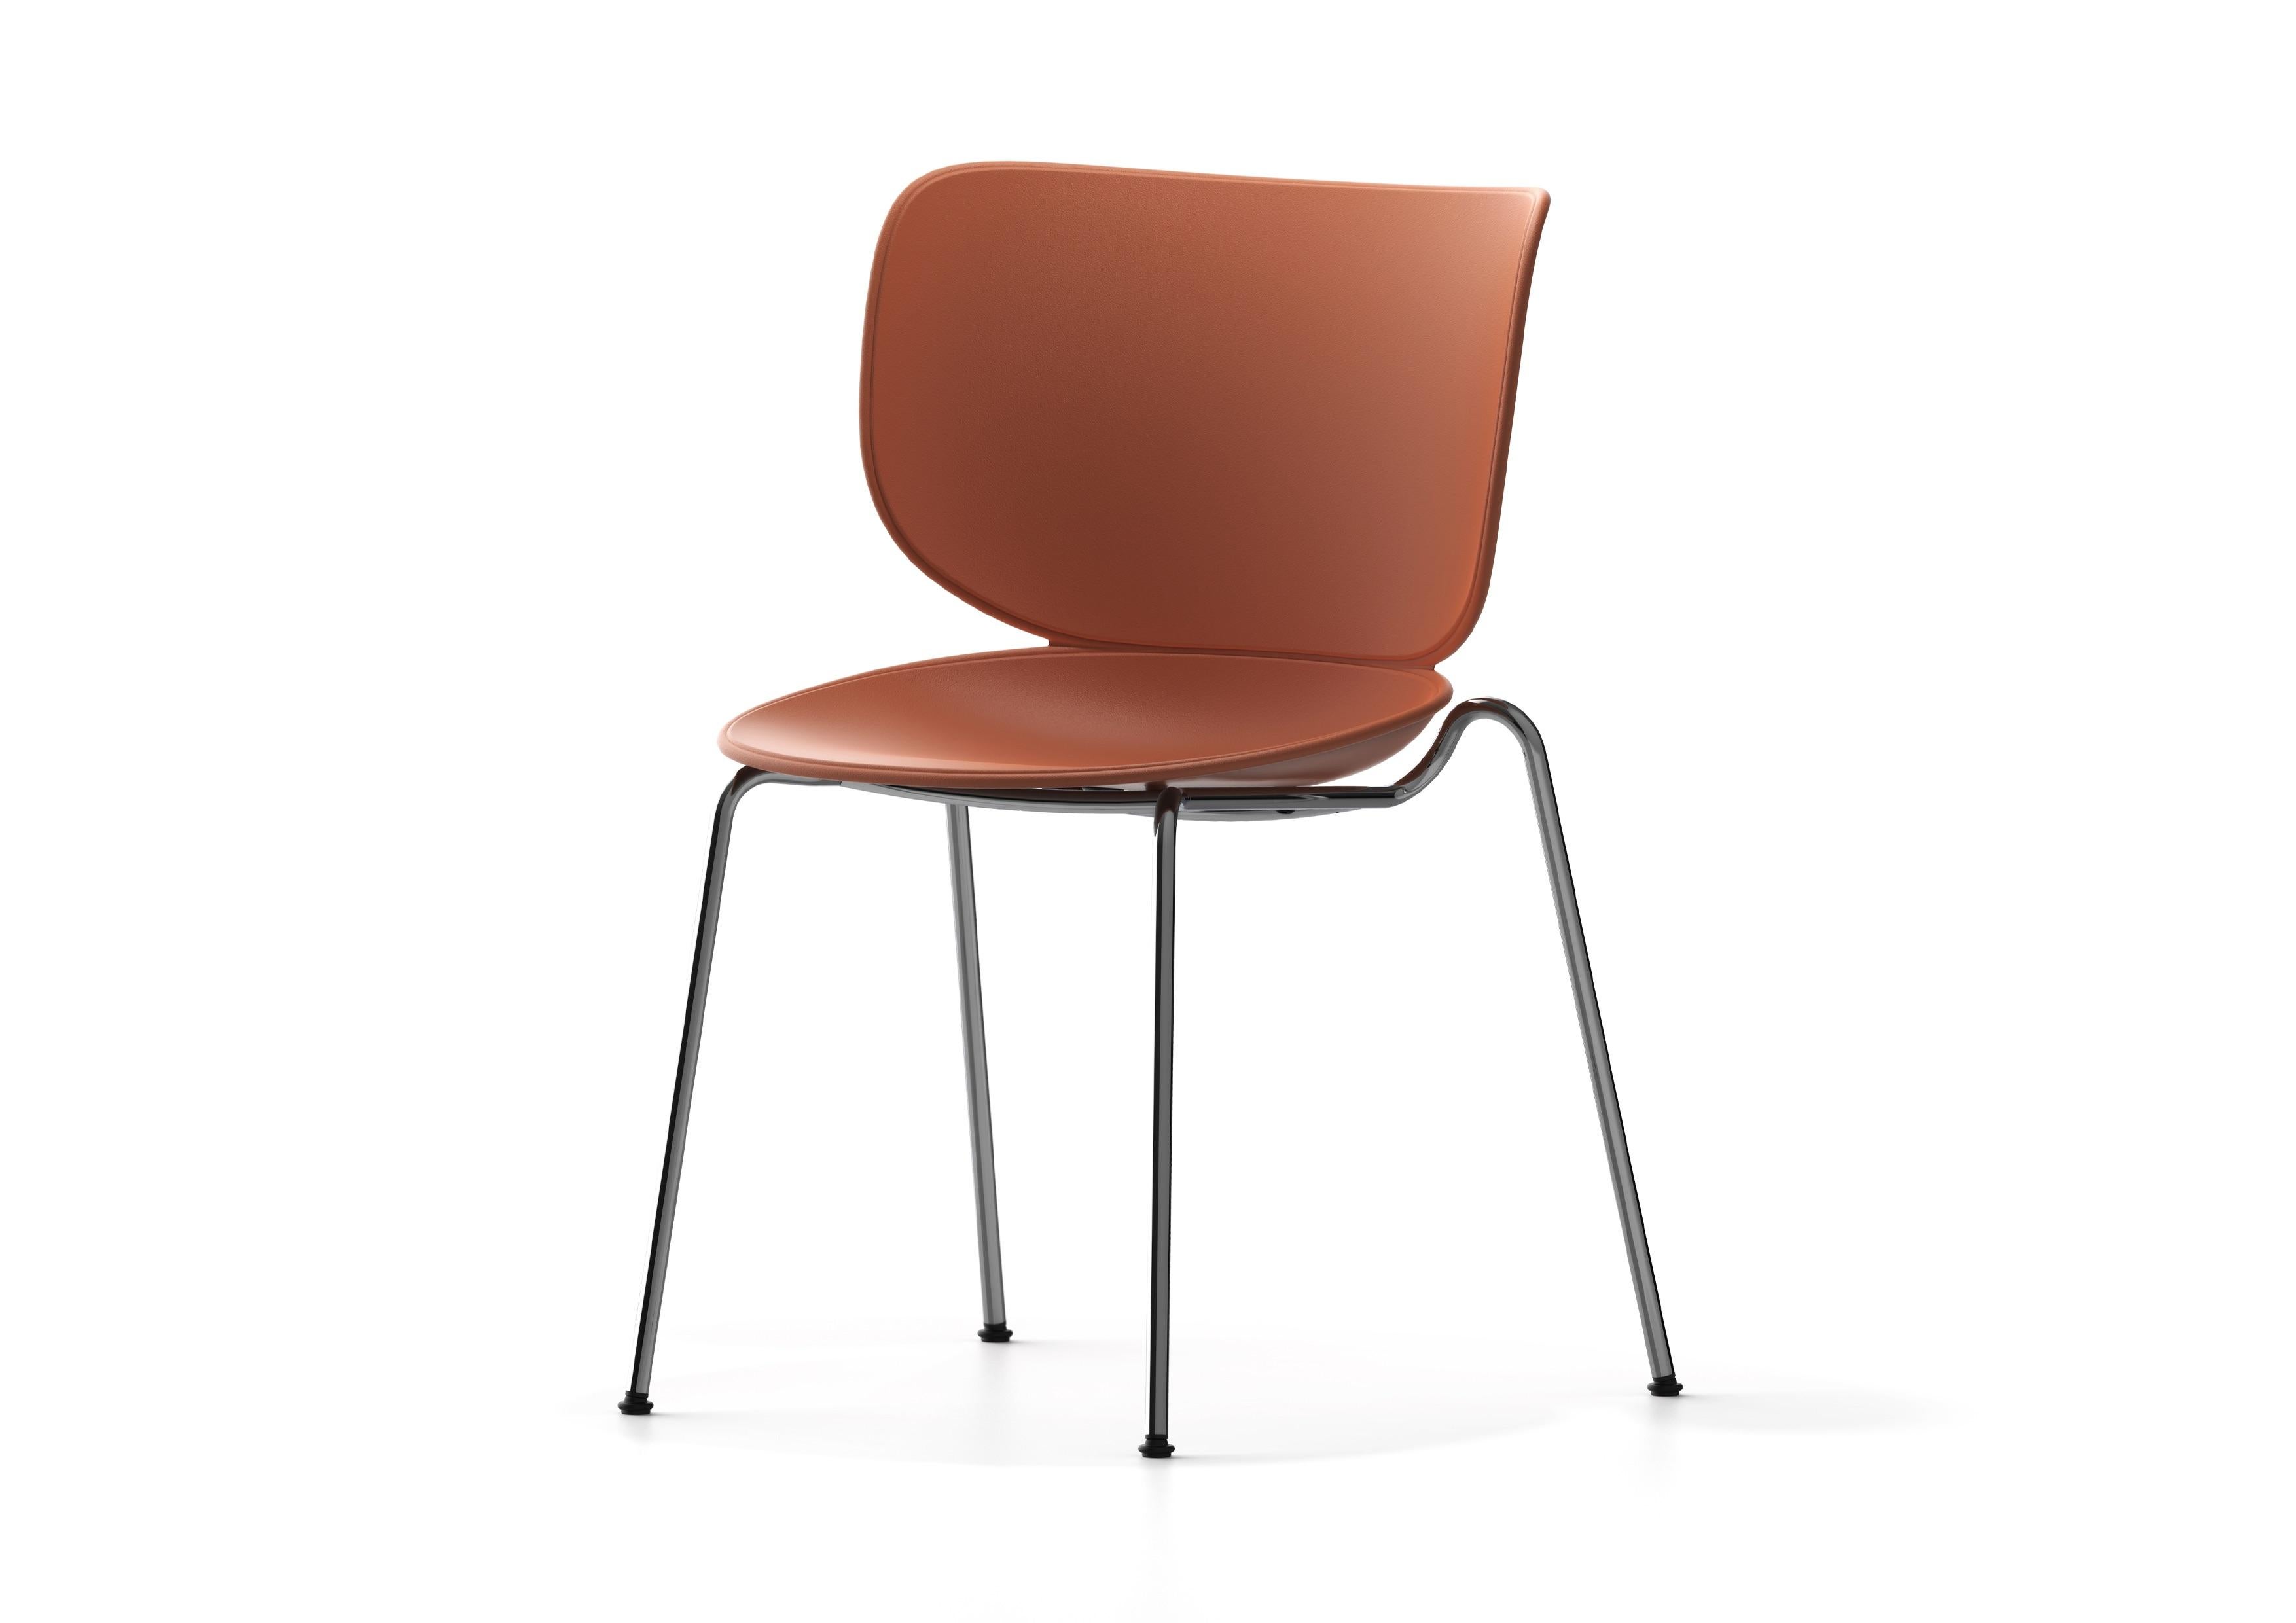 The Hana Chair by Simone Bonanni combines timeless comfort and unparalleled distinction. Inspired by the unfurling of a flower, its unique design captivates with organic shapes, curved lines, and a petal-like backrest. Versatile and customisable,